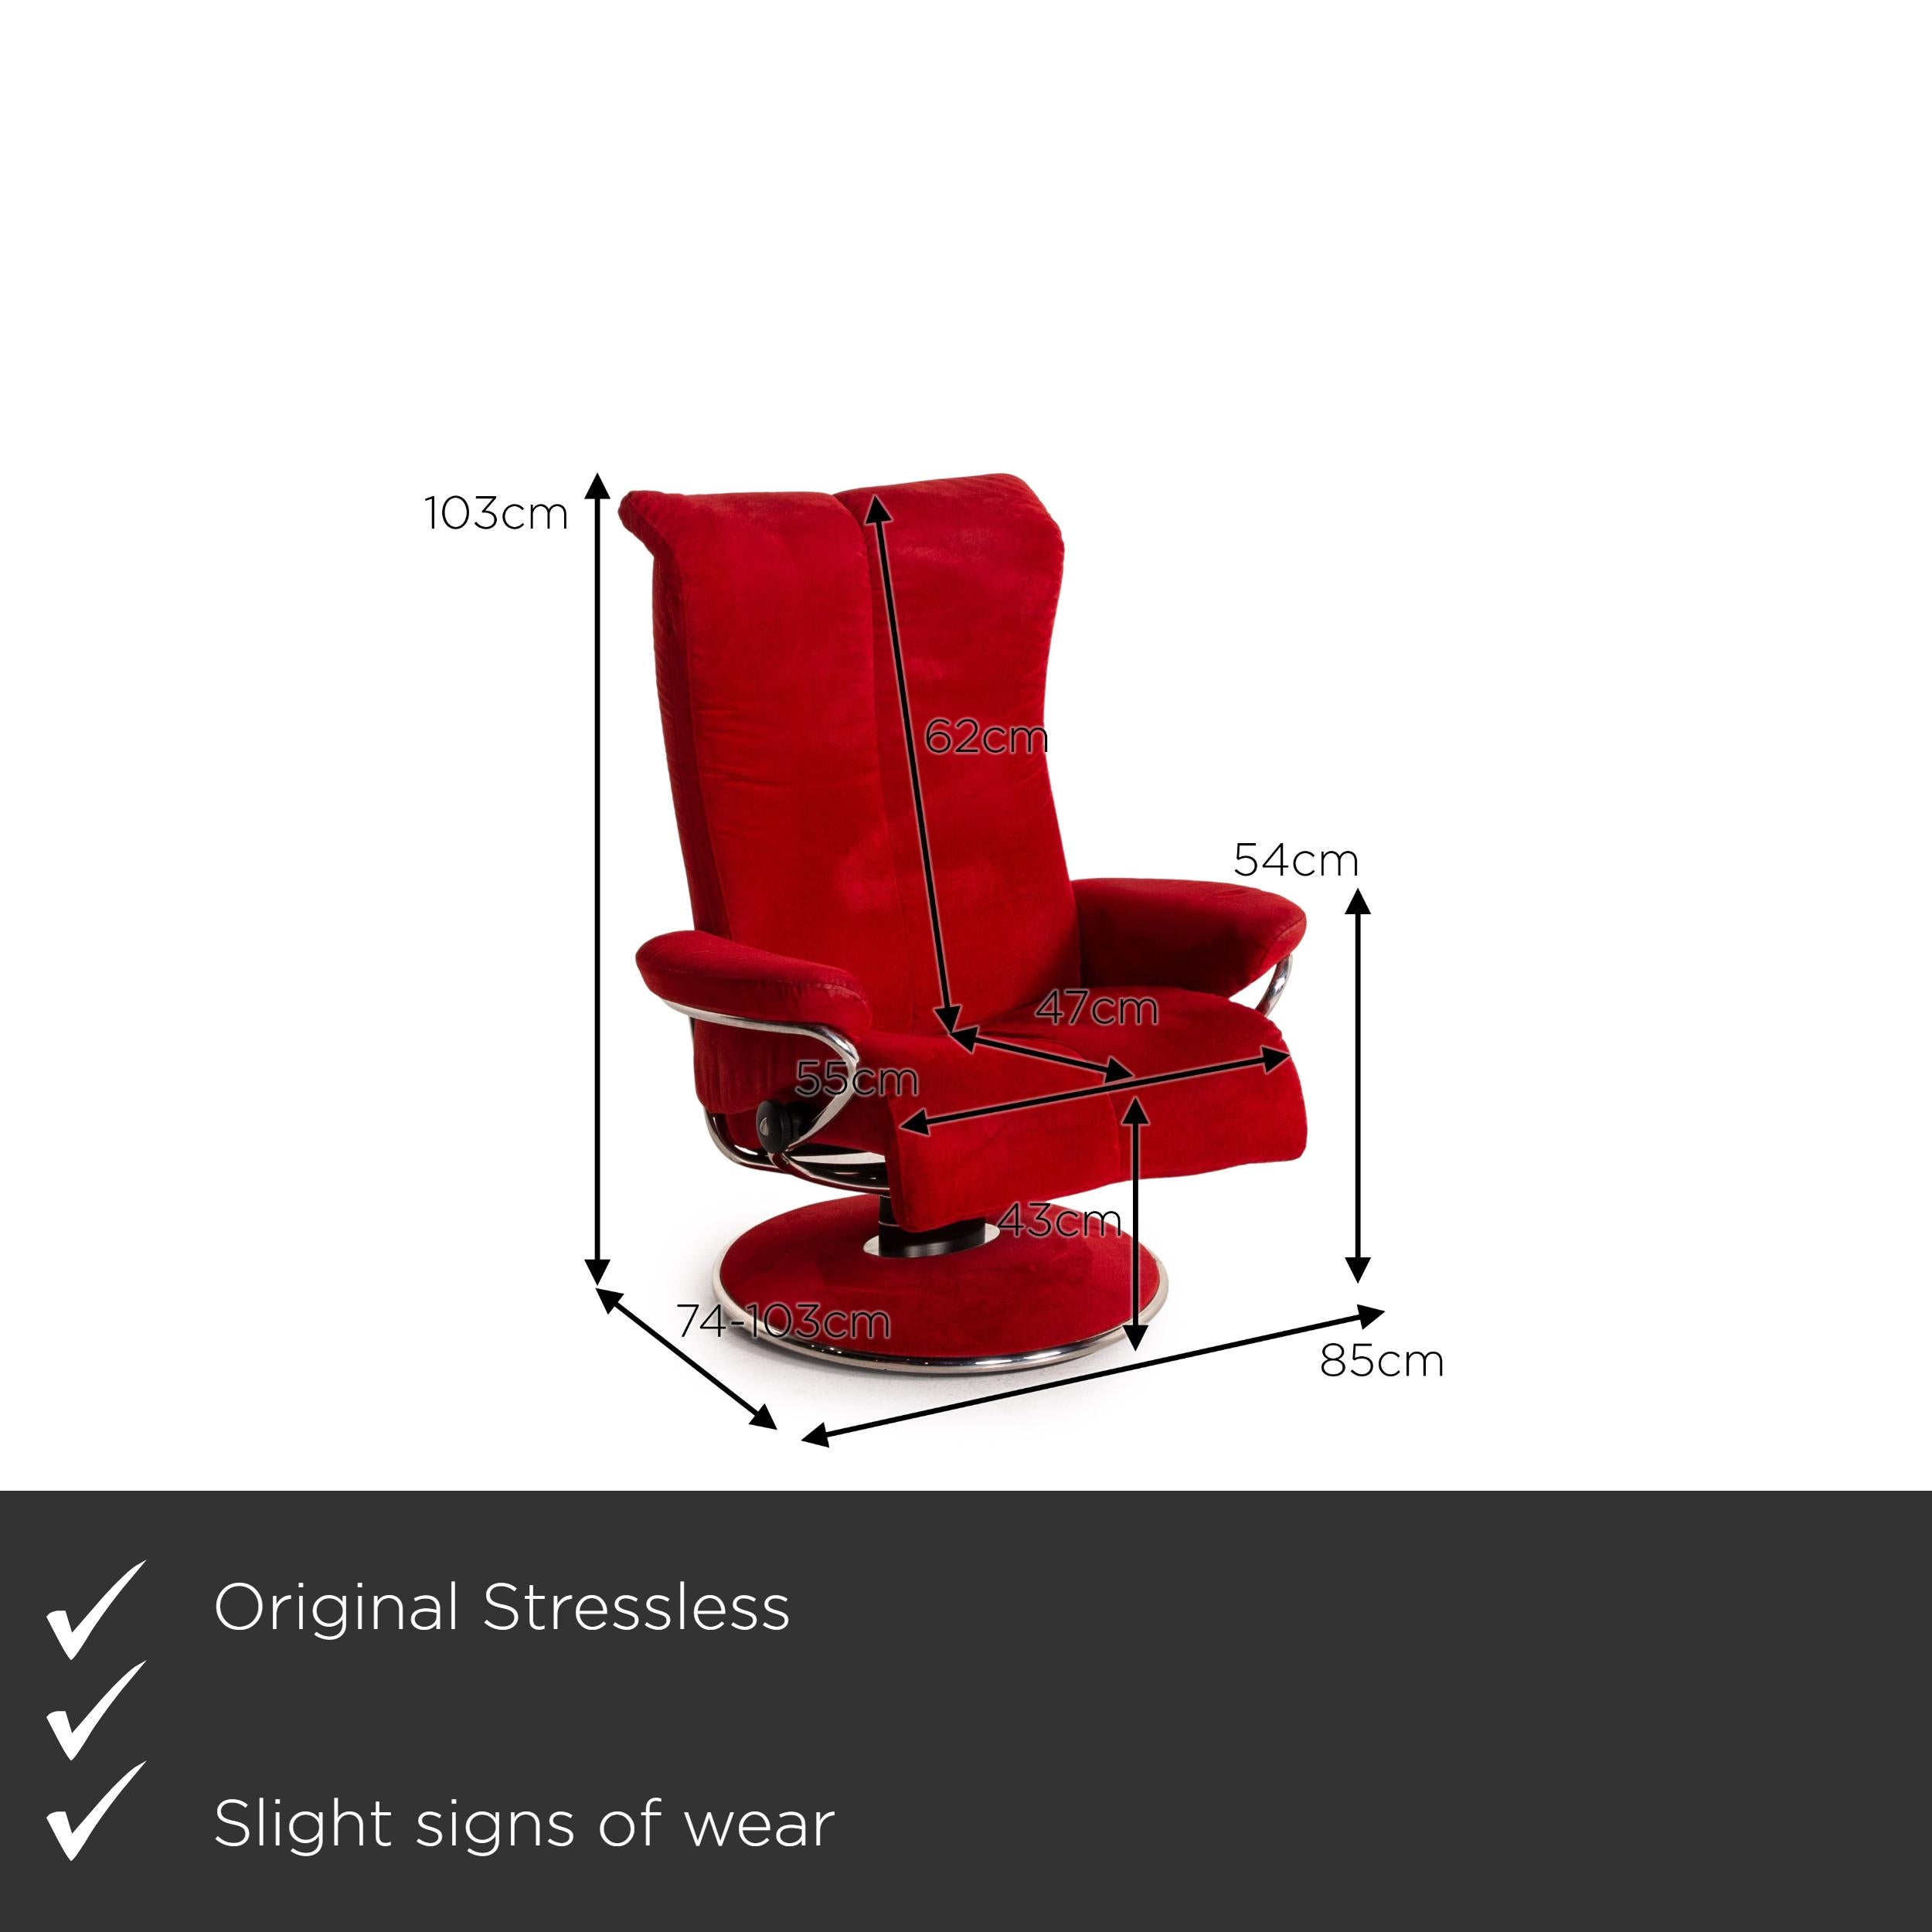 We present to you a stressless blues fabric armchair incl. Red stool.
  
 

 Product measurements in centimeters:
 

Depth 74
Width 85
Height 103
Seat height 43
Rest height 54
Seat depth 47
Seat width 55
Back height 62.